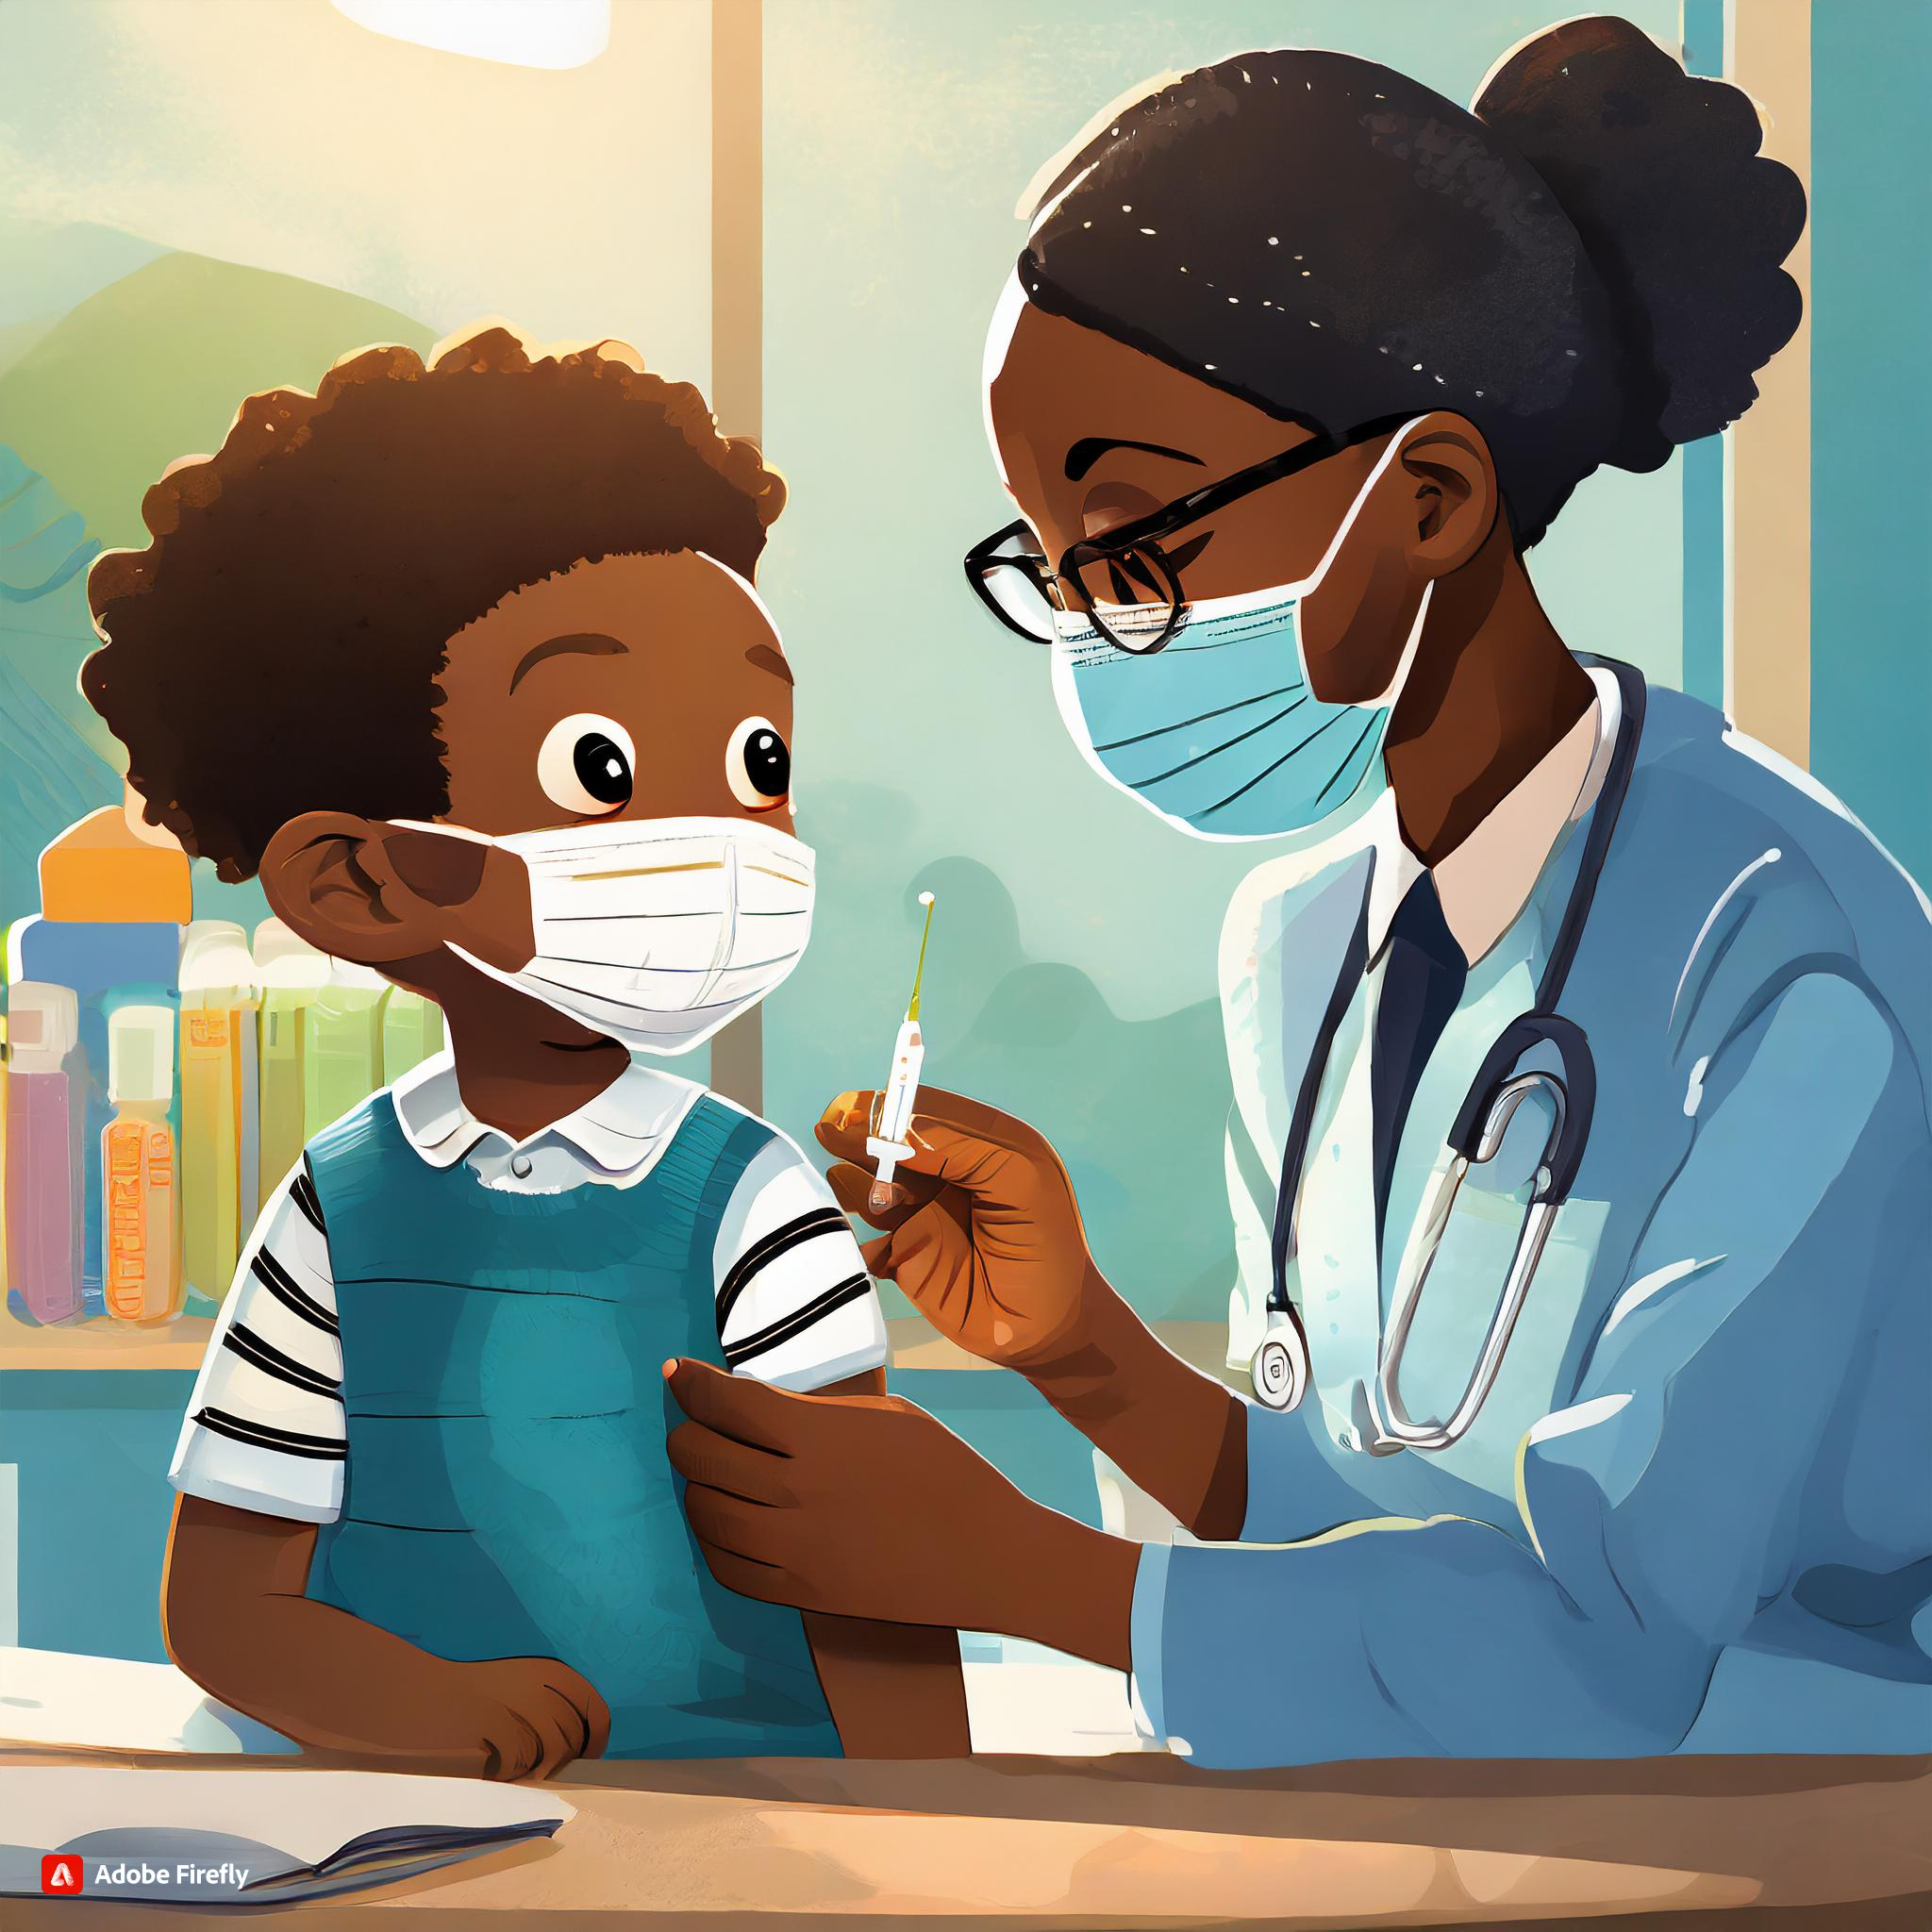 Firefly Create a graphic or artwork depicting a black baby receiving a measles vaccination or a heal.jpg